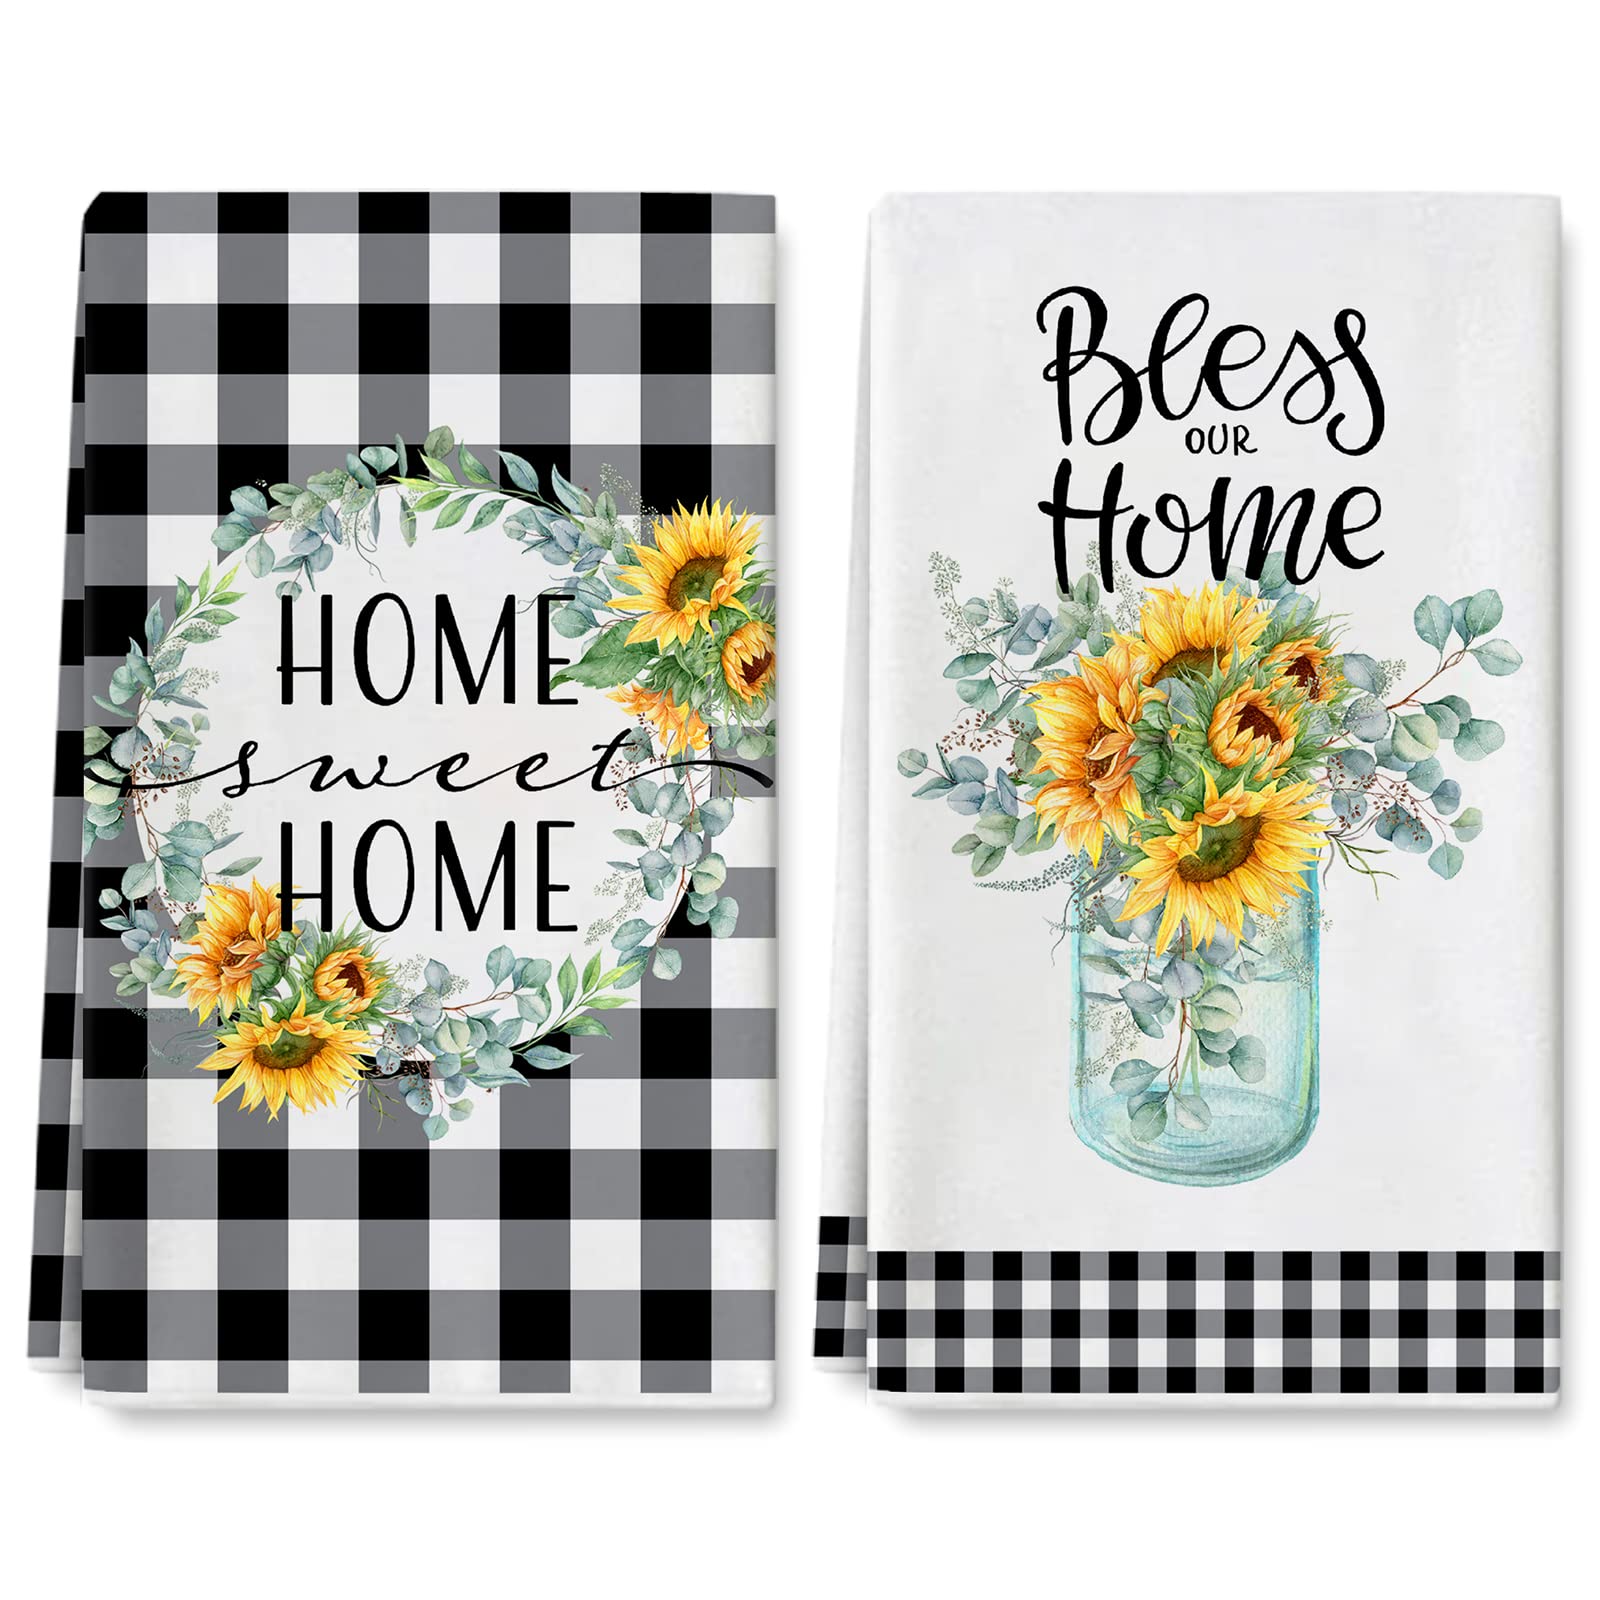 AnyDesign Summer Sunflower Kitchen Towel Buffalo Plaids Dish Cloths Floral Dish Towel Home Hand Towels Sweet Hand Drying Tea Towel for Seasonal Holiday Cooking Baking Cleaning Wiping, 18 x 28 In, 2Pcs